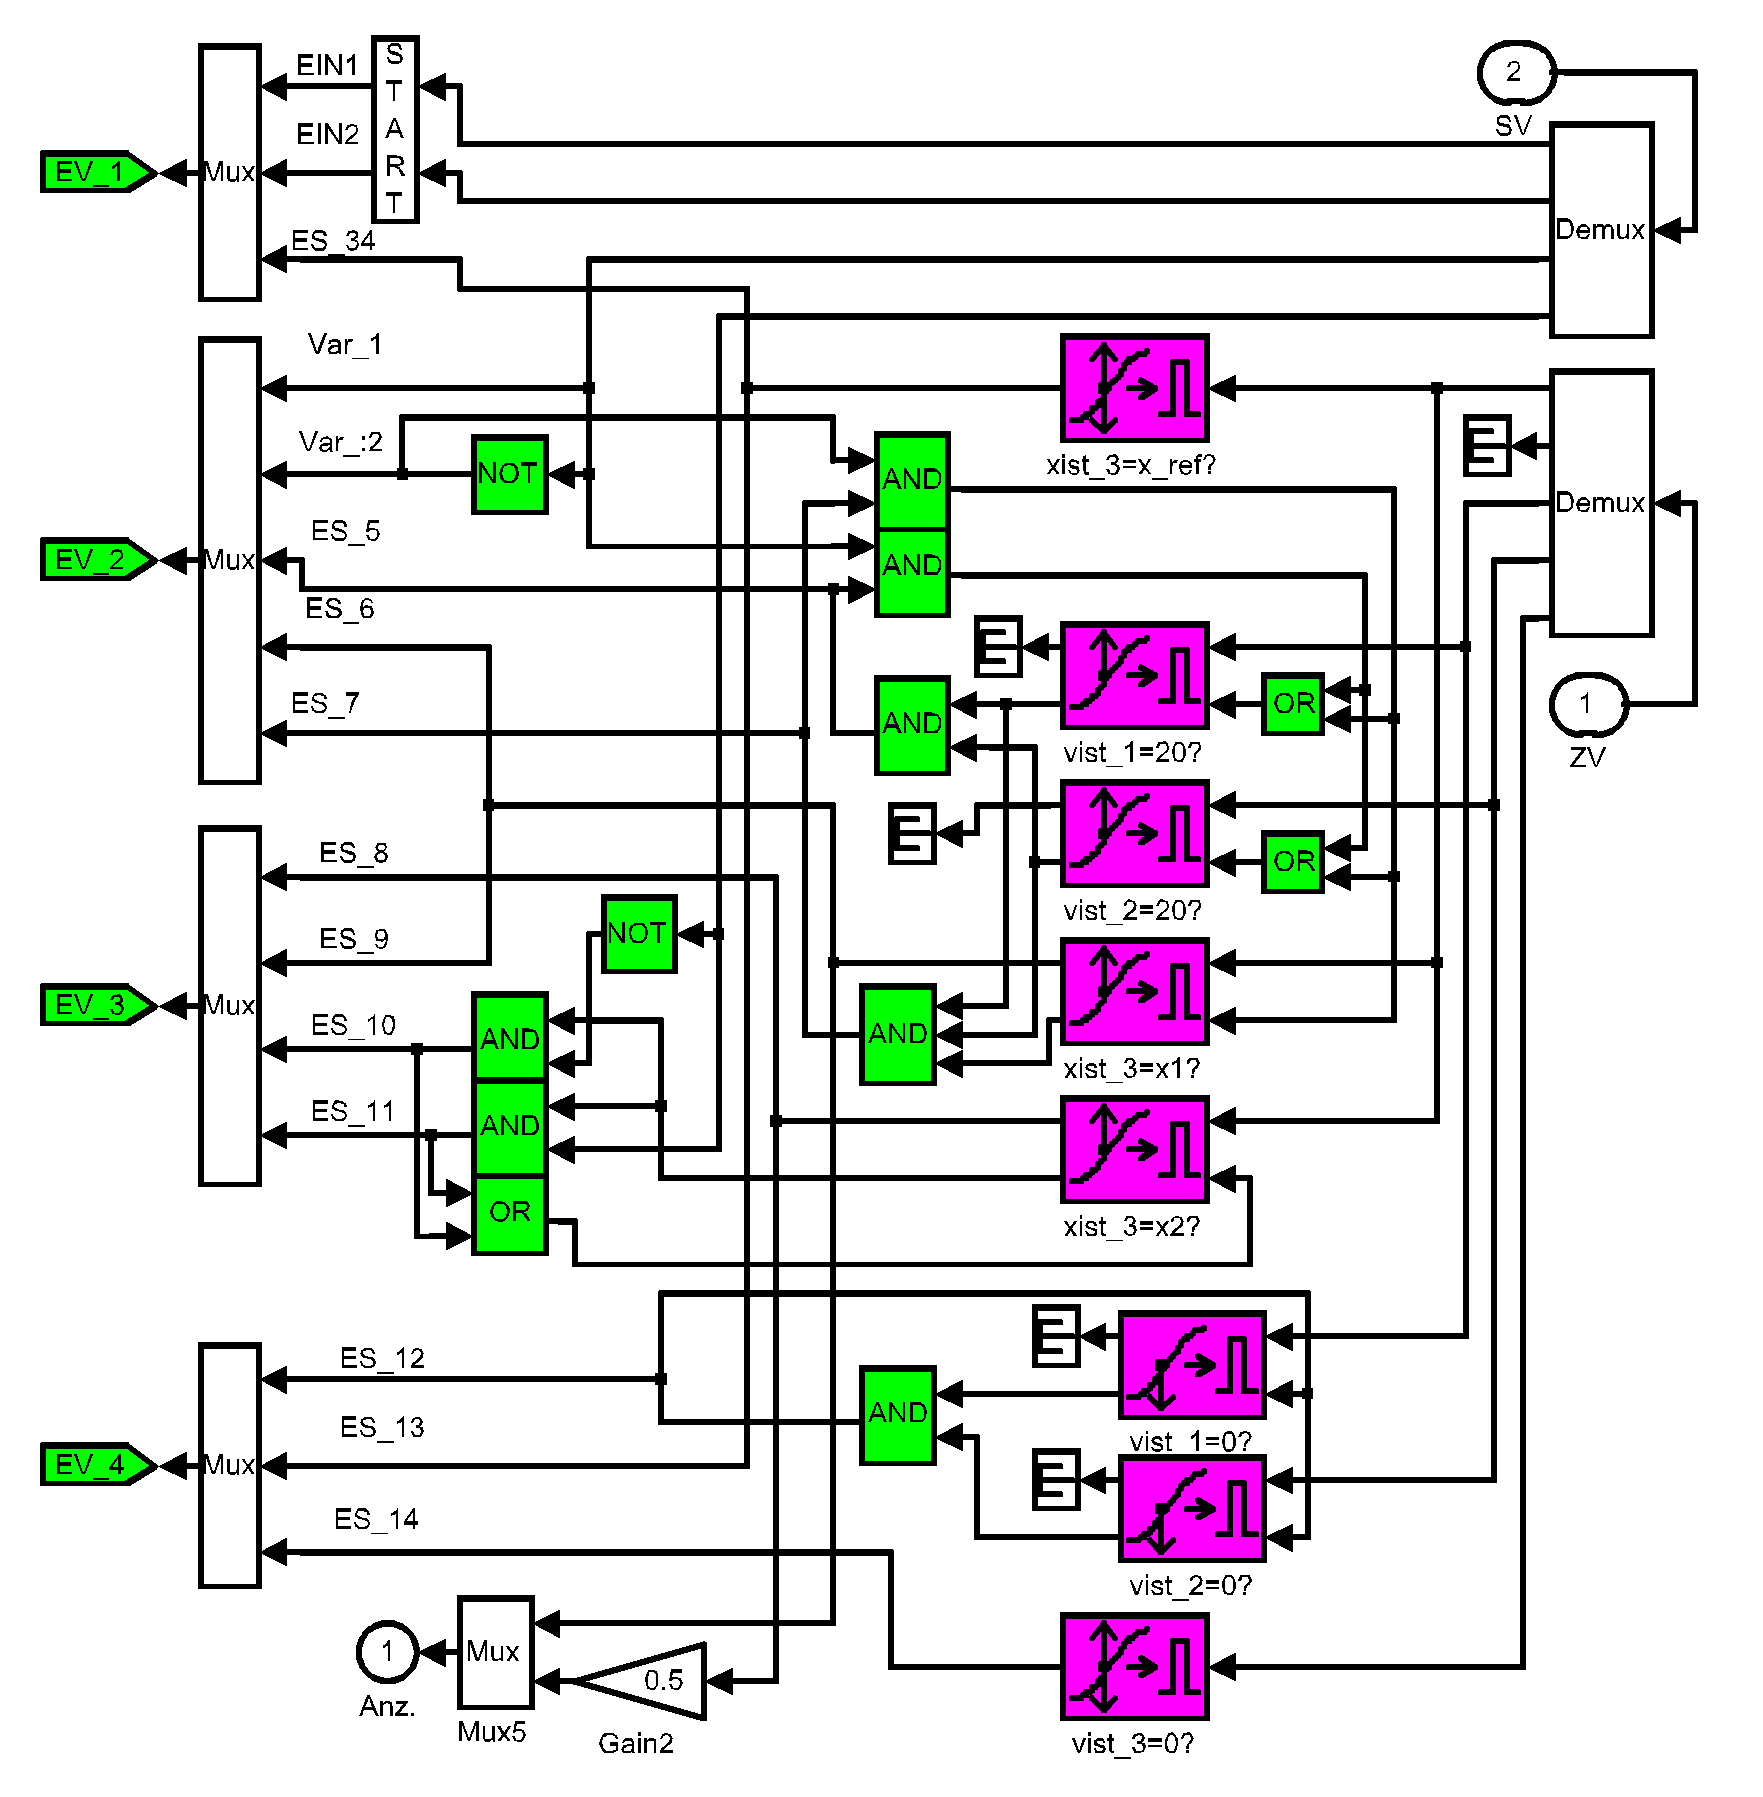 FUP example 9: process connection